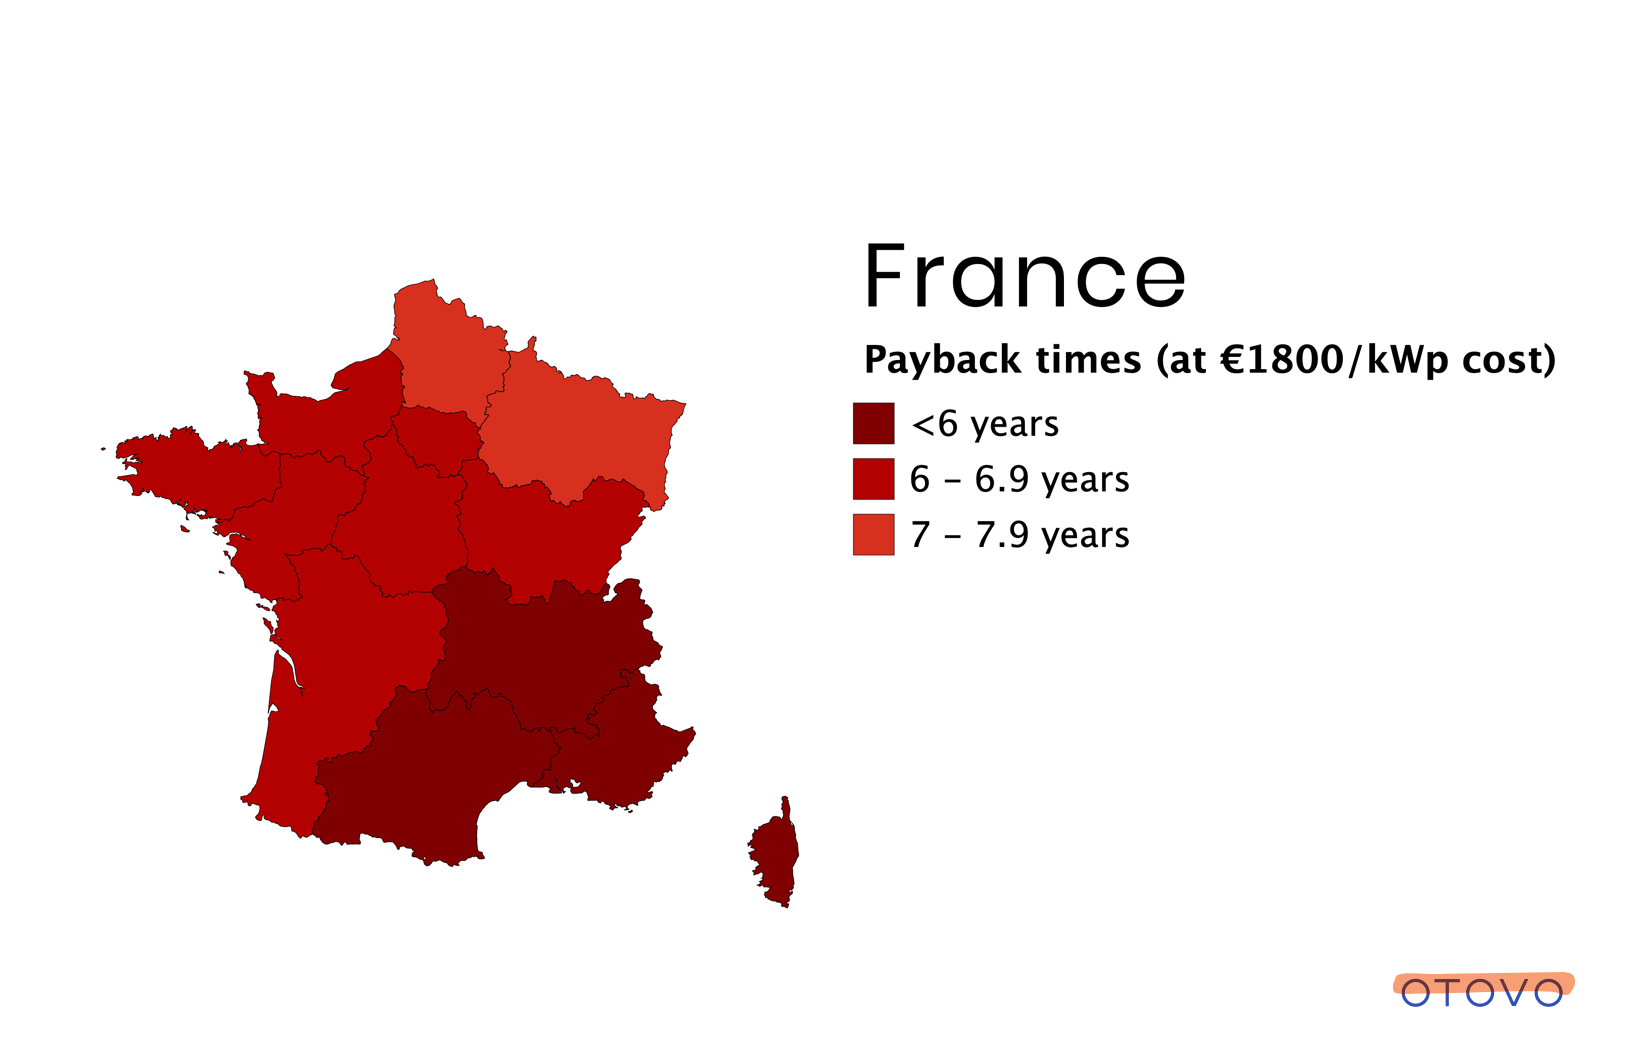 France has traditionally had low energy prices, thanks to nuclear power.